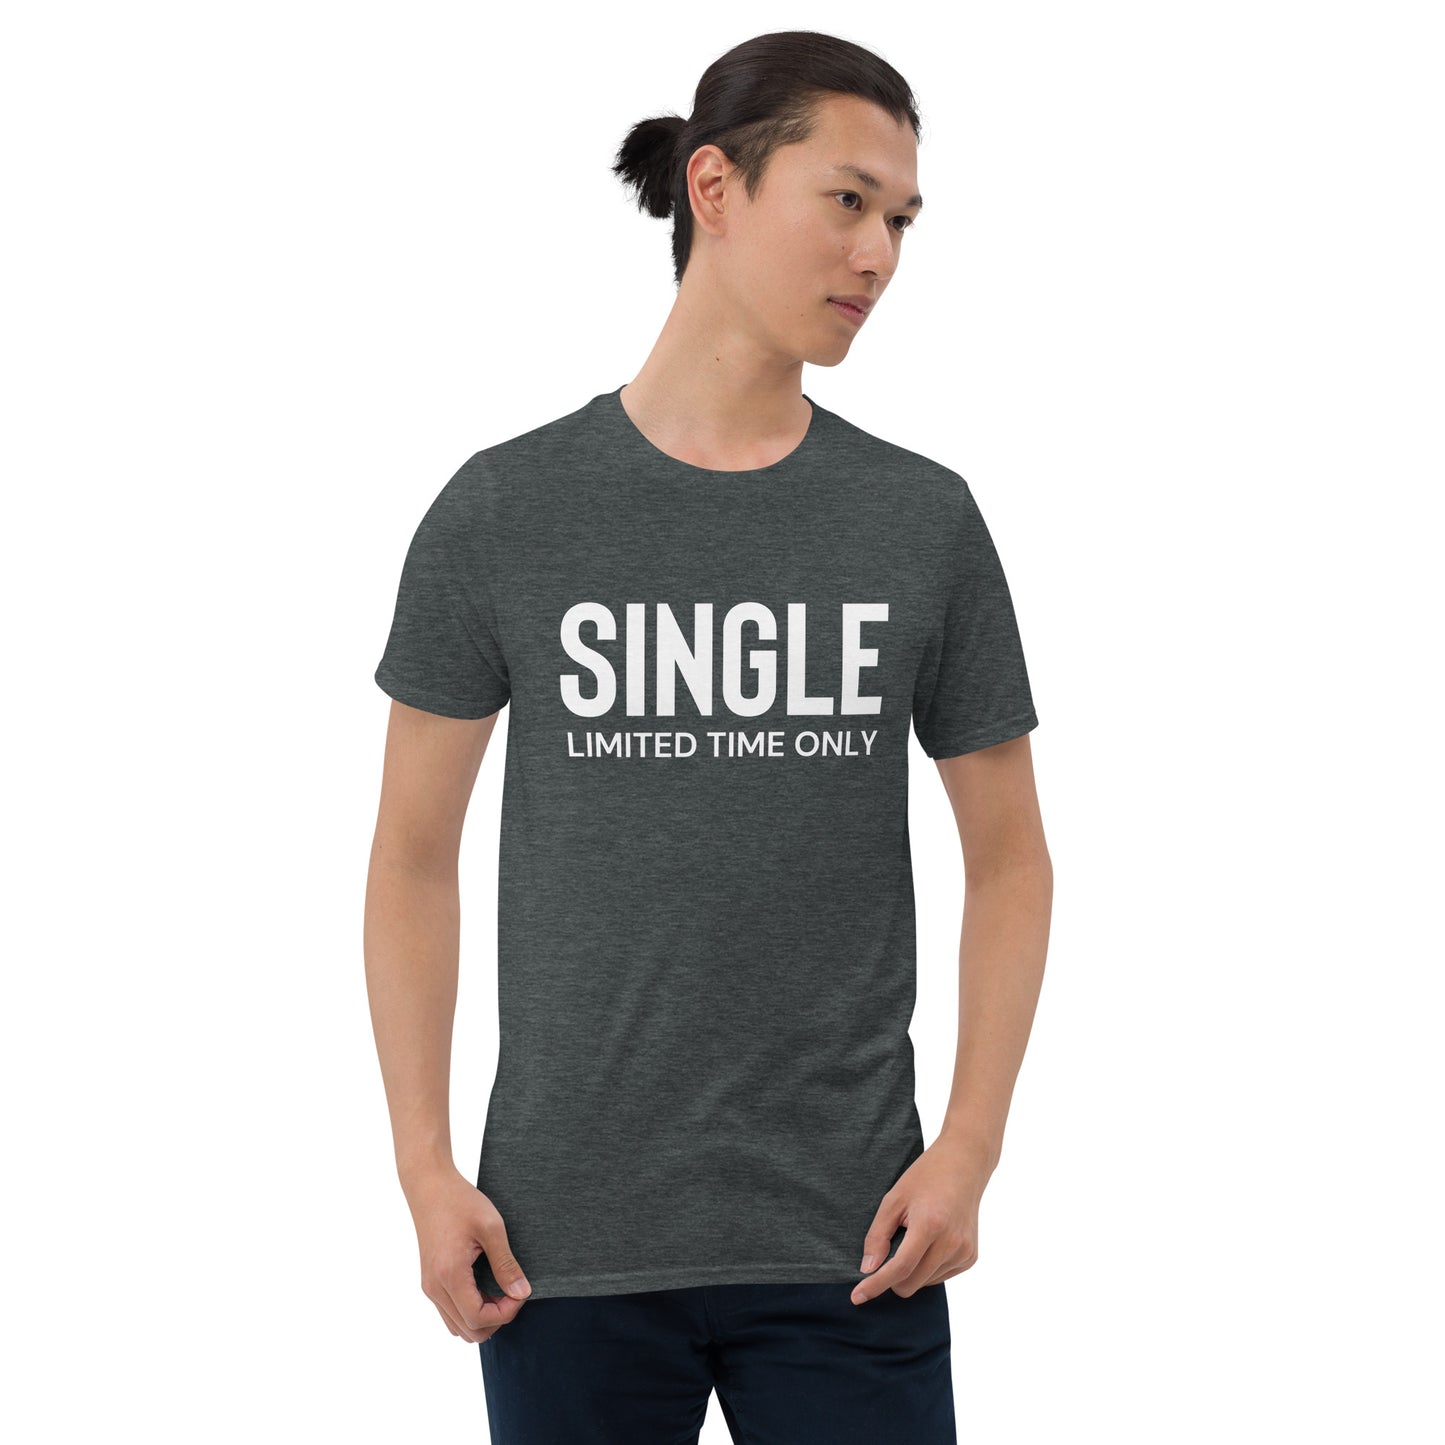 Single Limited Time Only: Relationship Status T-Shirt